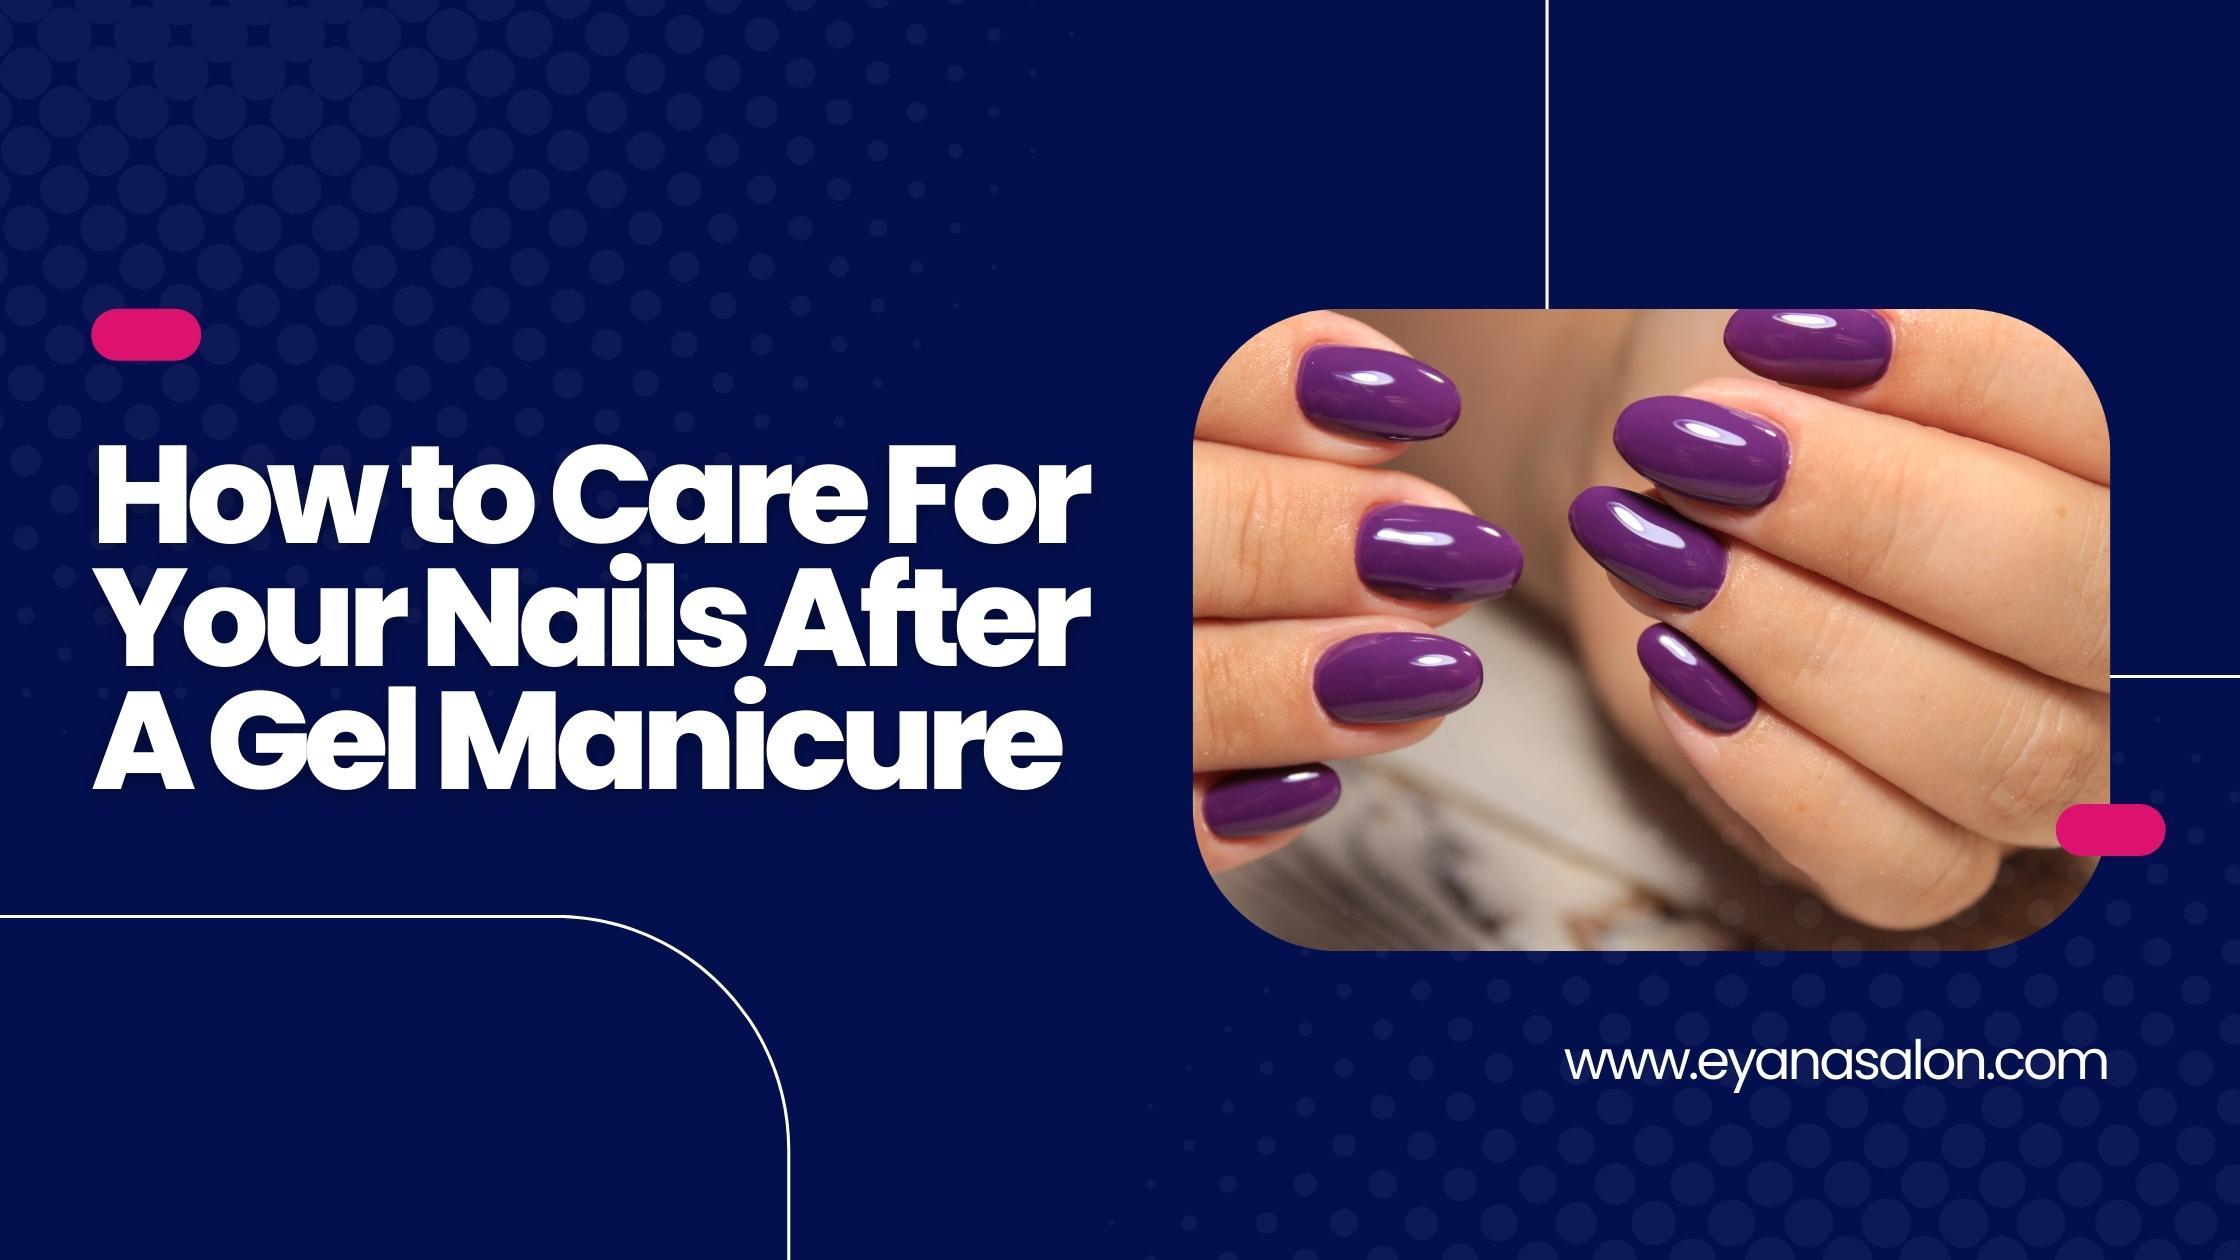 How to Care For Your Nails After A Gel Manicure | Best Manicure in Dubai